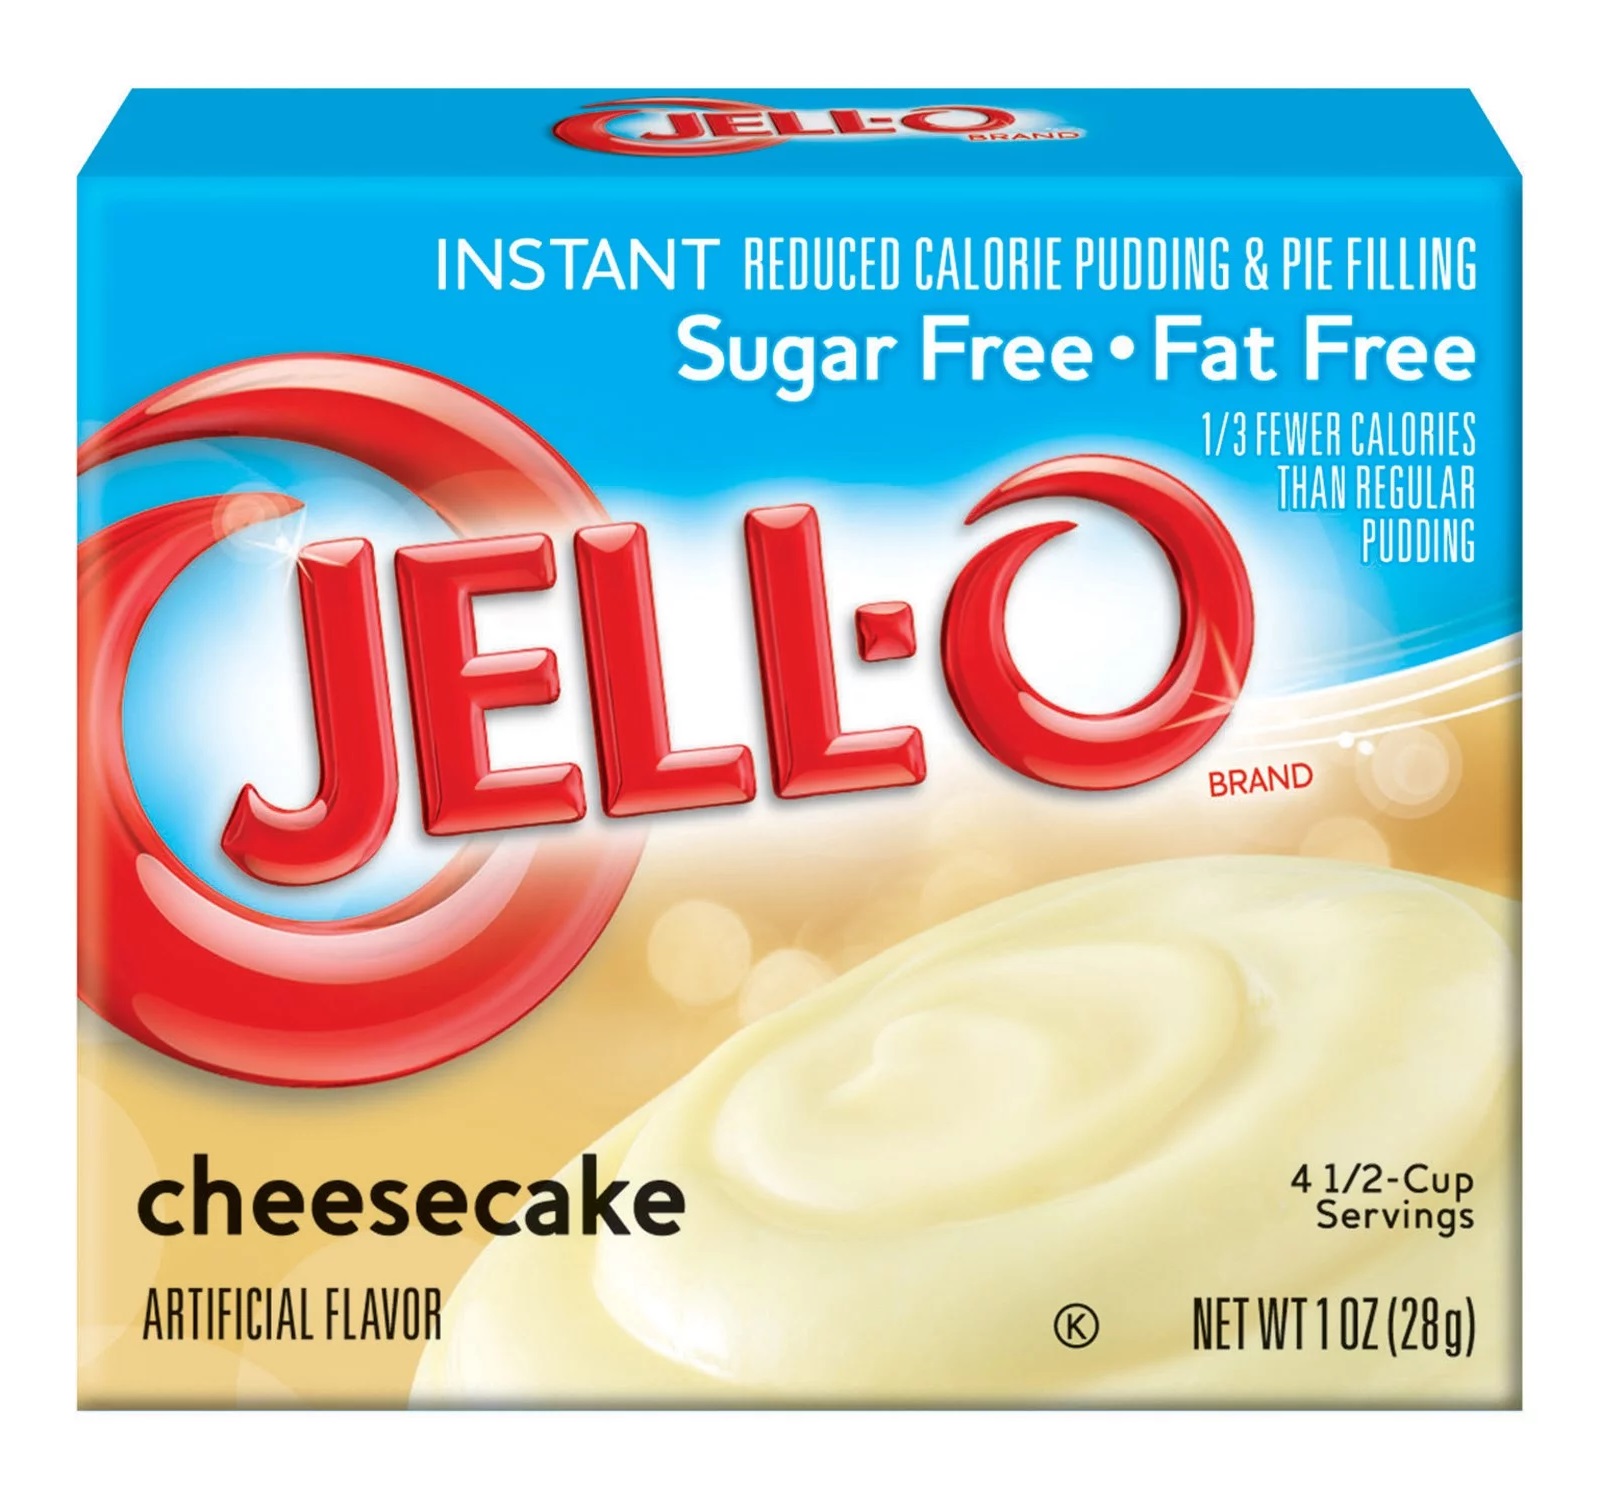 15-sugar-free-cheesecake-pudding-nutrition-facts